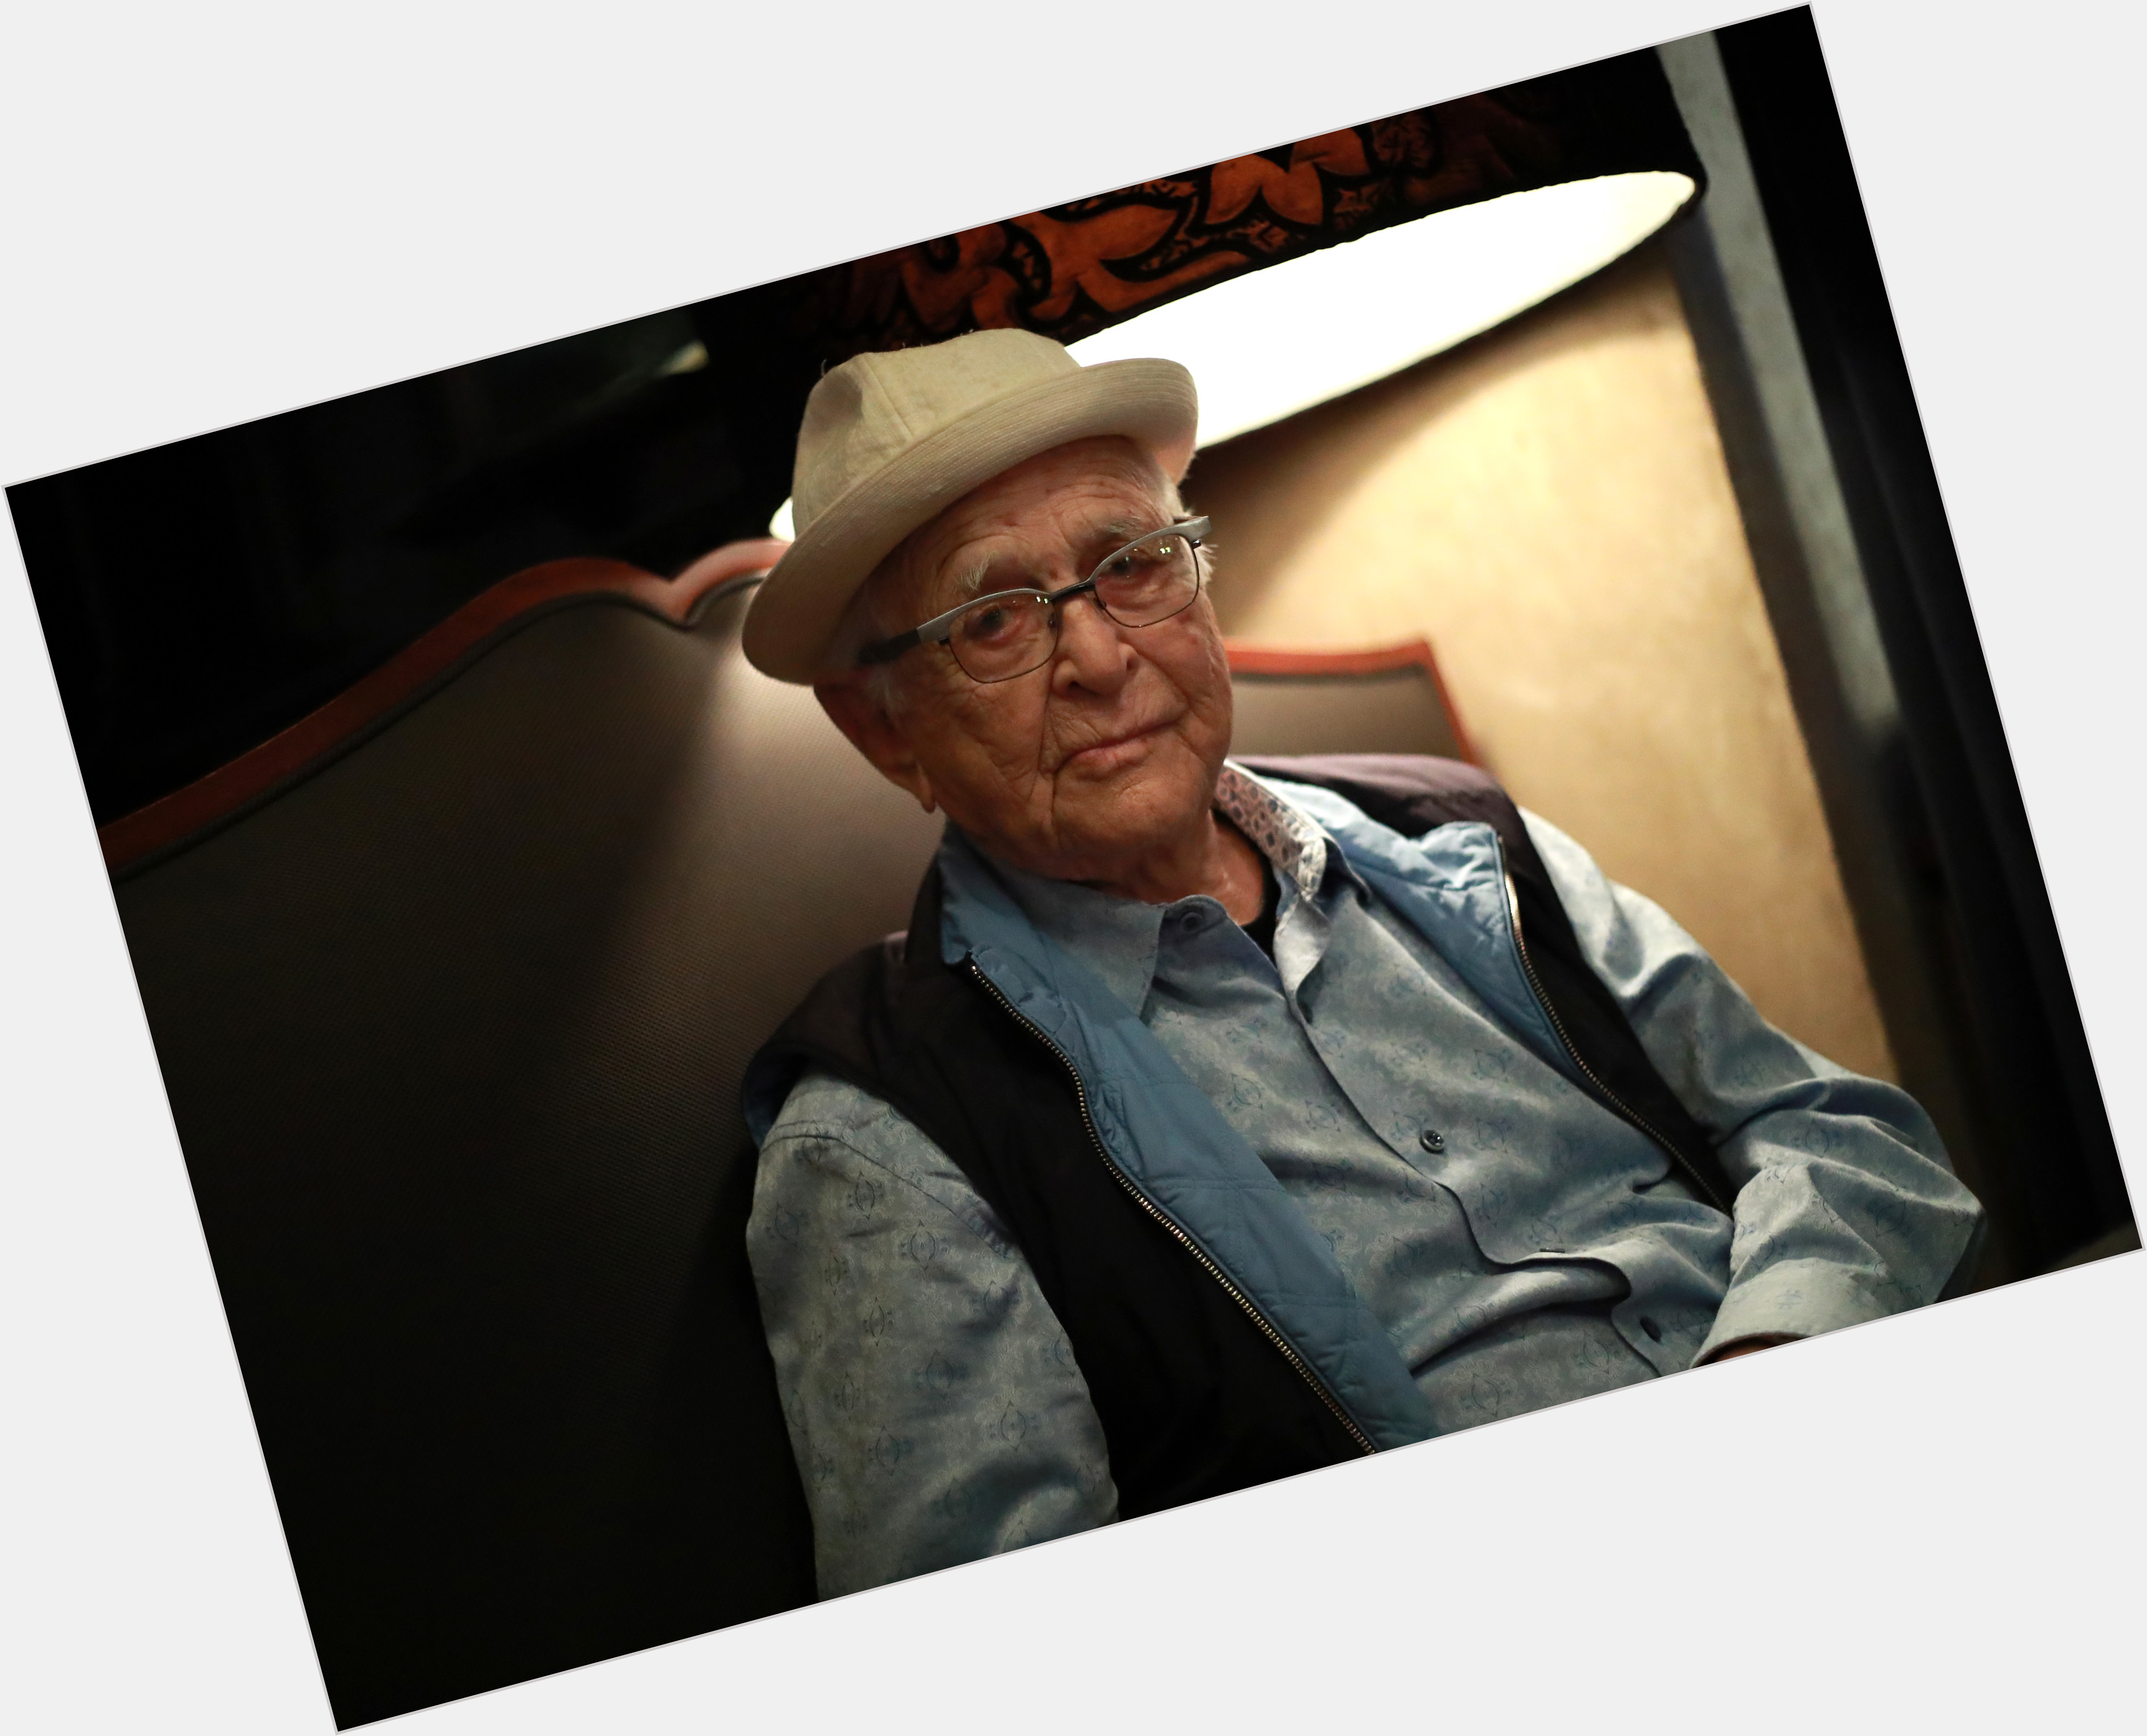 <a href="/hot-men/norman-lear/is-he-alive-still-living-liberal-married-what">Norman Lear</a> Average body,  grey hair & hairstyles